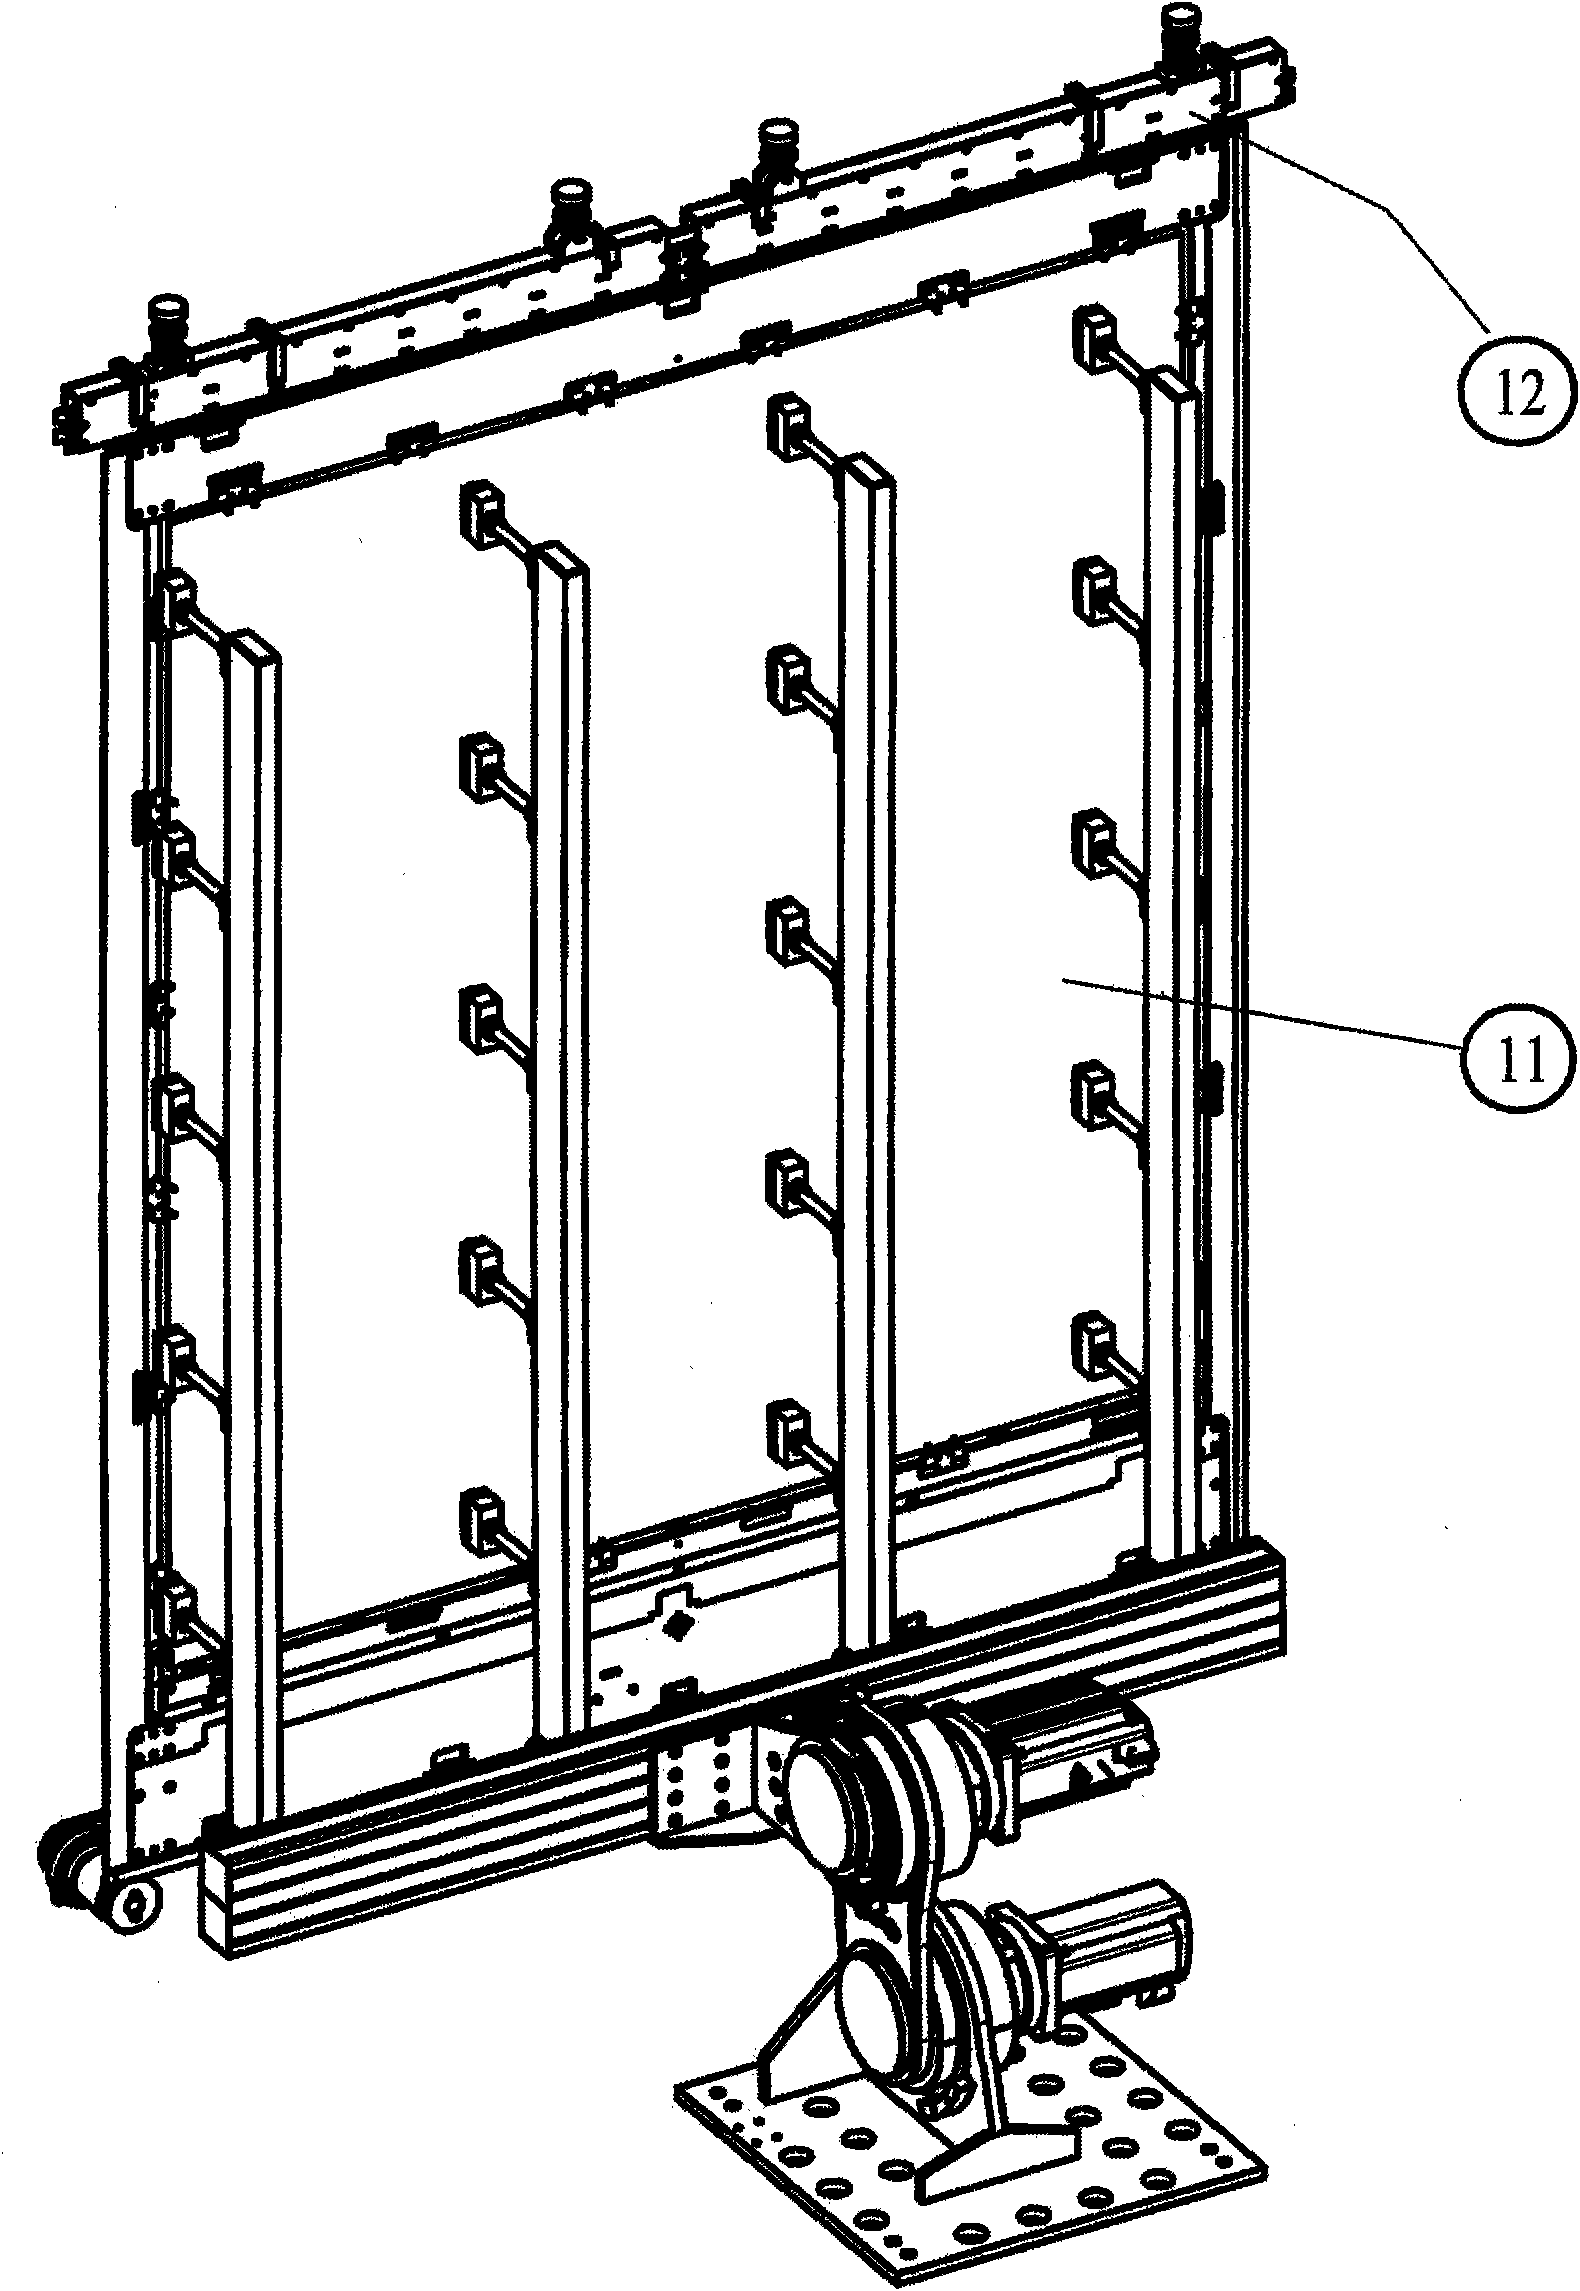 Apparatus and method for transferring shock-sensitive glass plates in ultra clean rooms